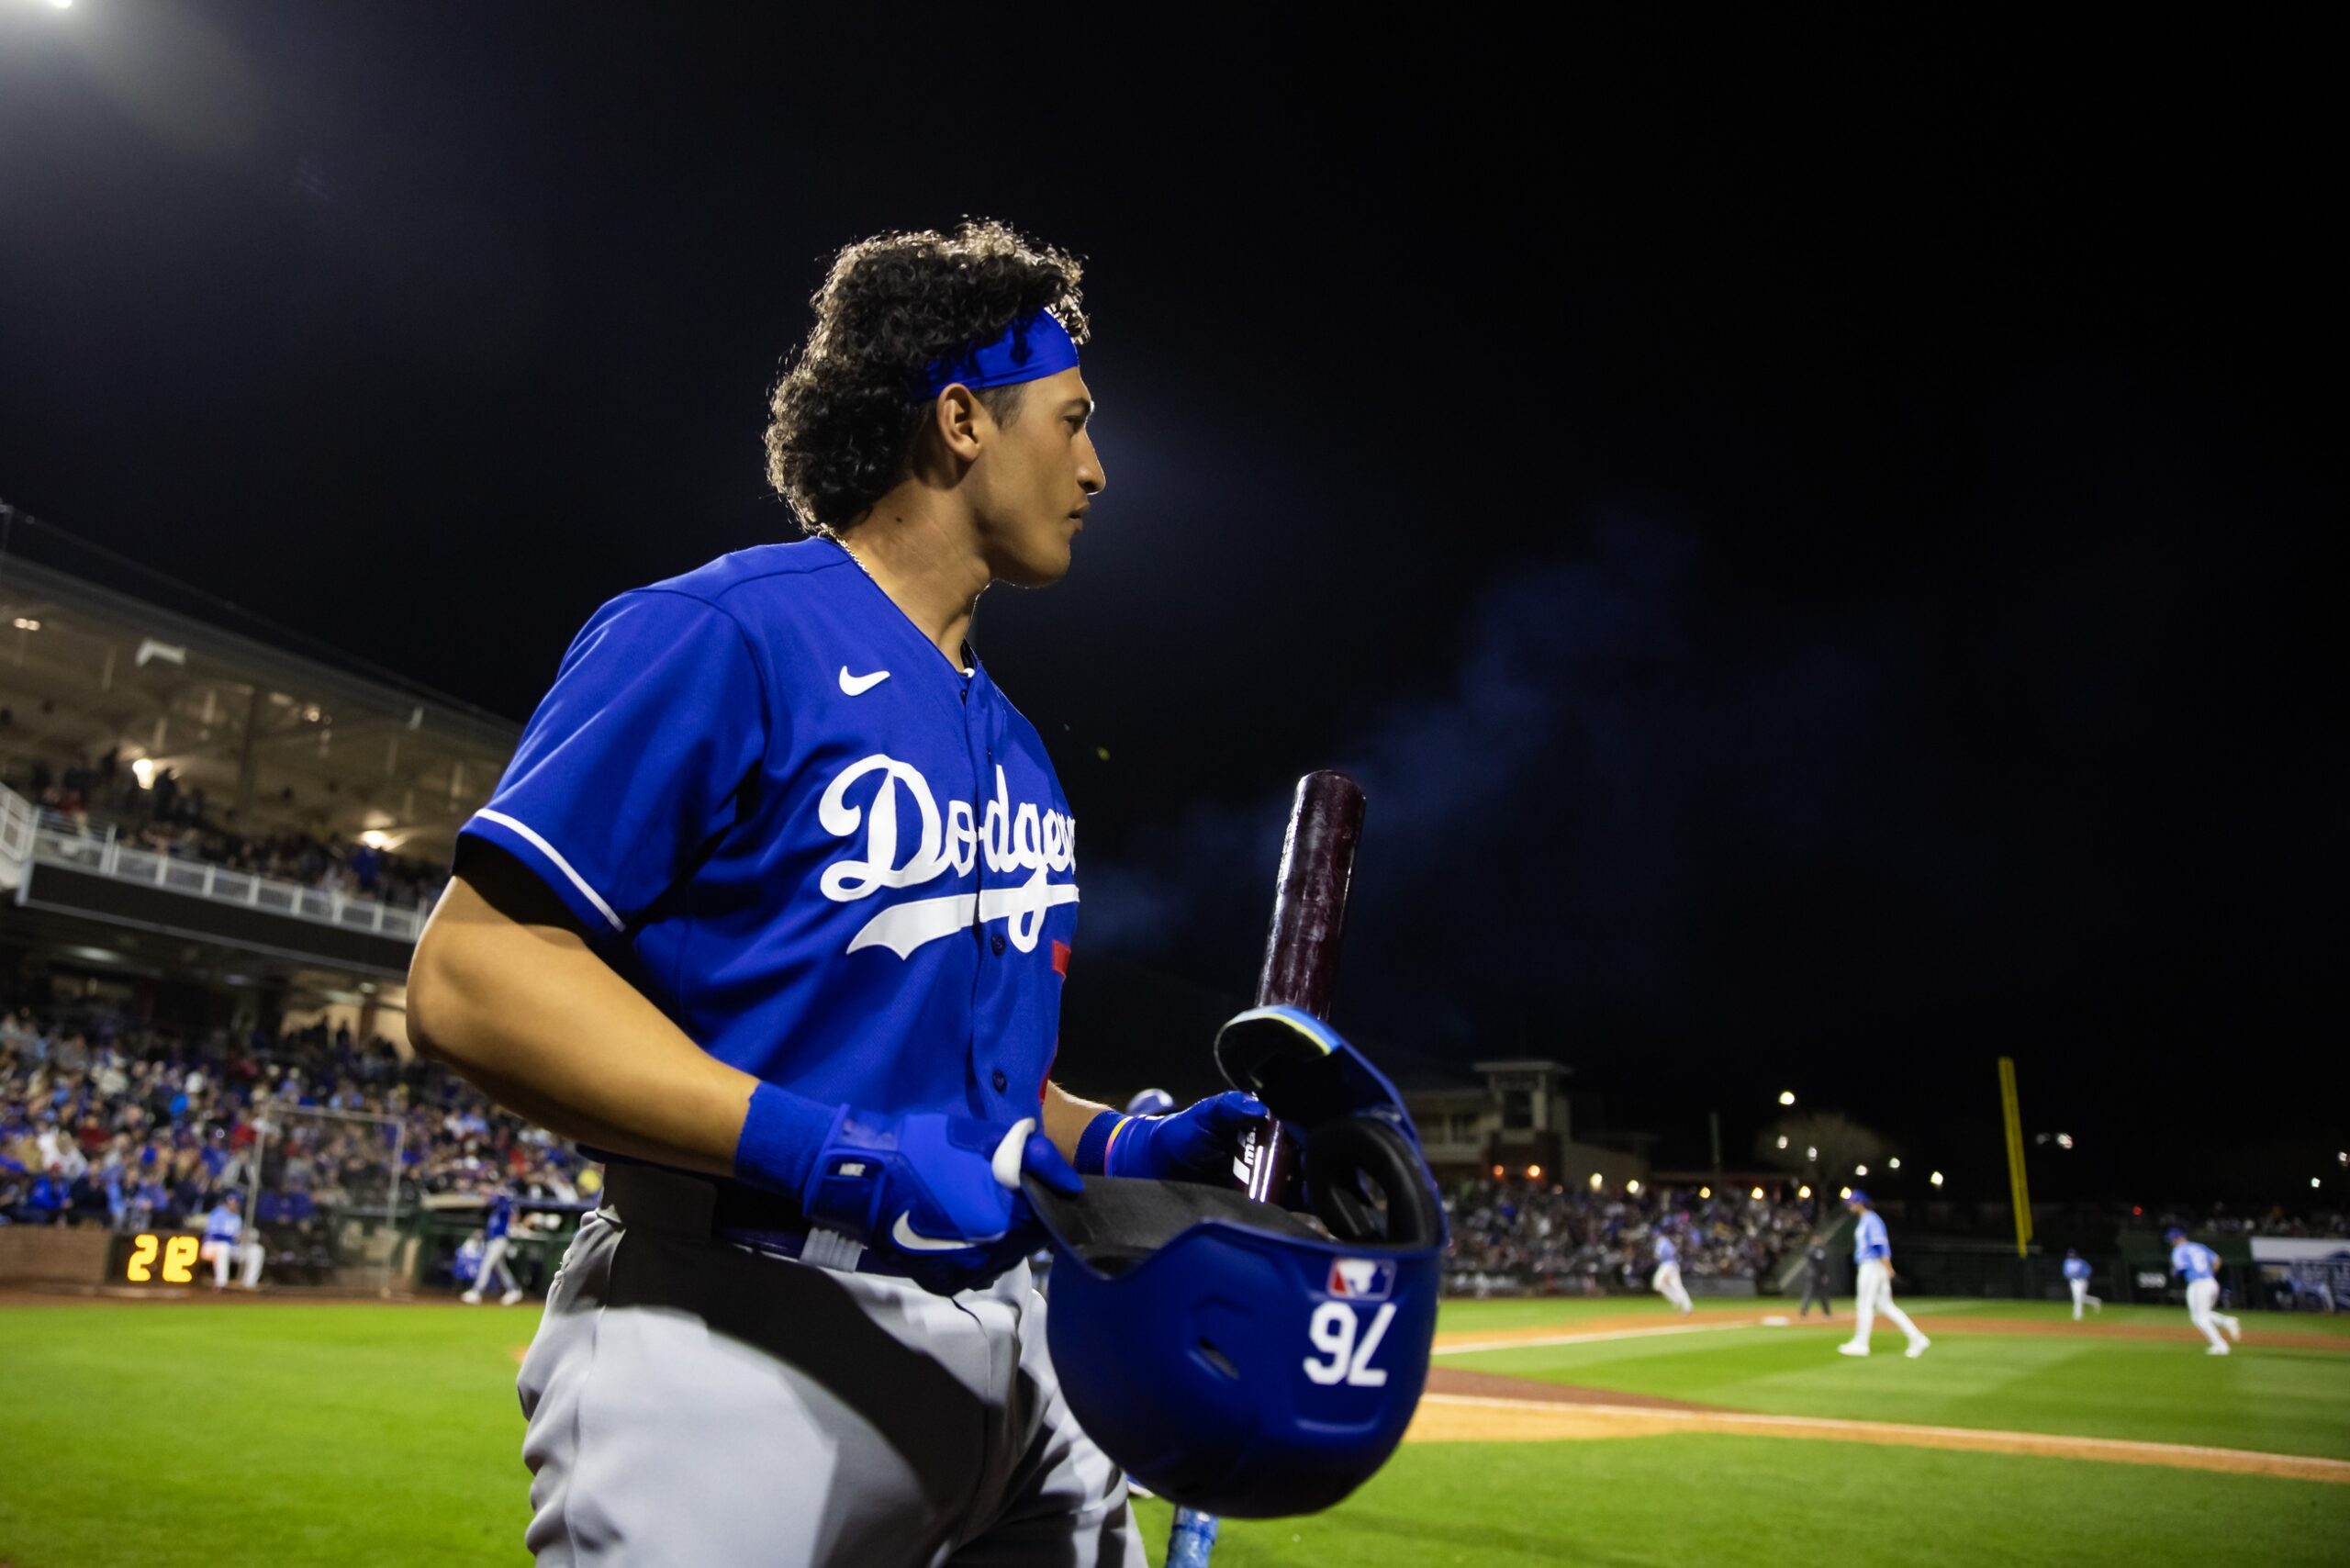 Dodger Notes: Arozarena Reacts, Roster Cuts, Barnes on Prospects, Vesia Aims, Dodger Retires & More